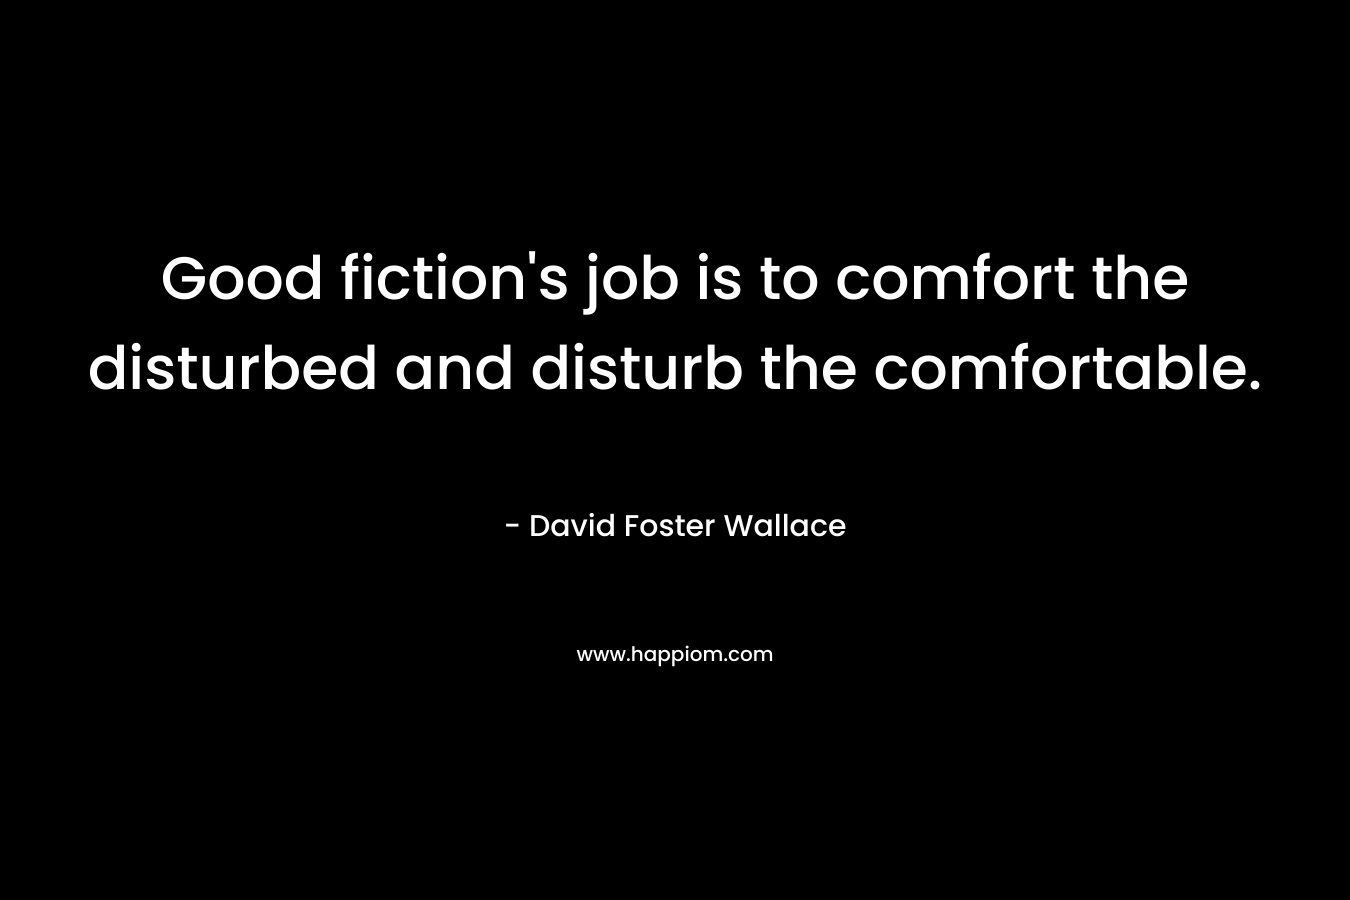 Good fiction's job is to comfort the disturbed and disturb the comfortable.